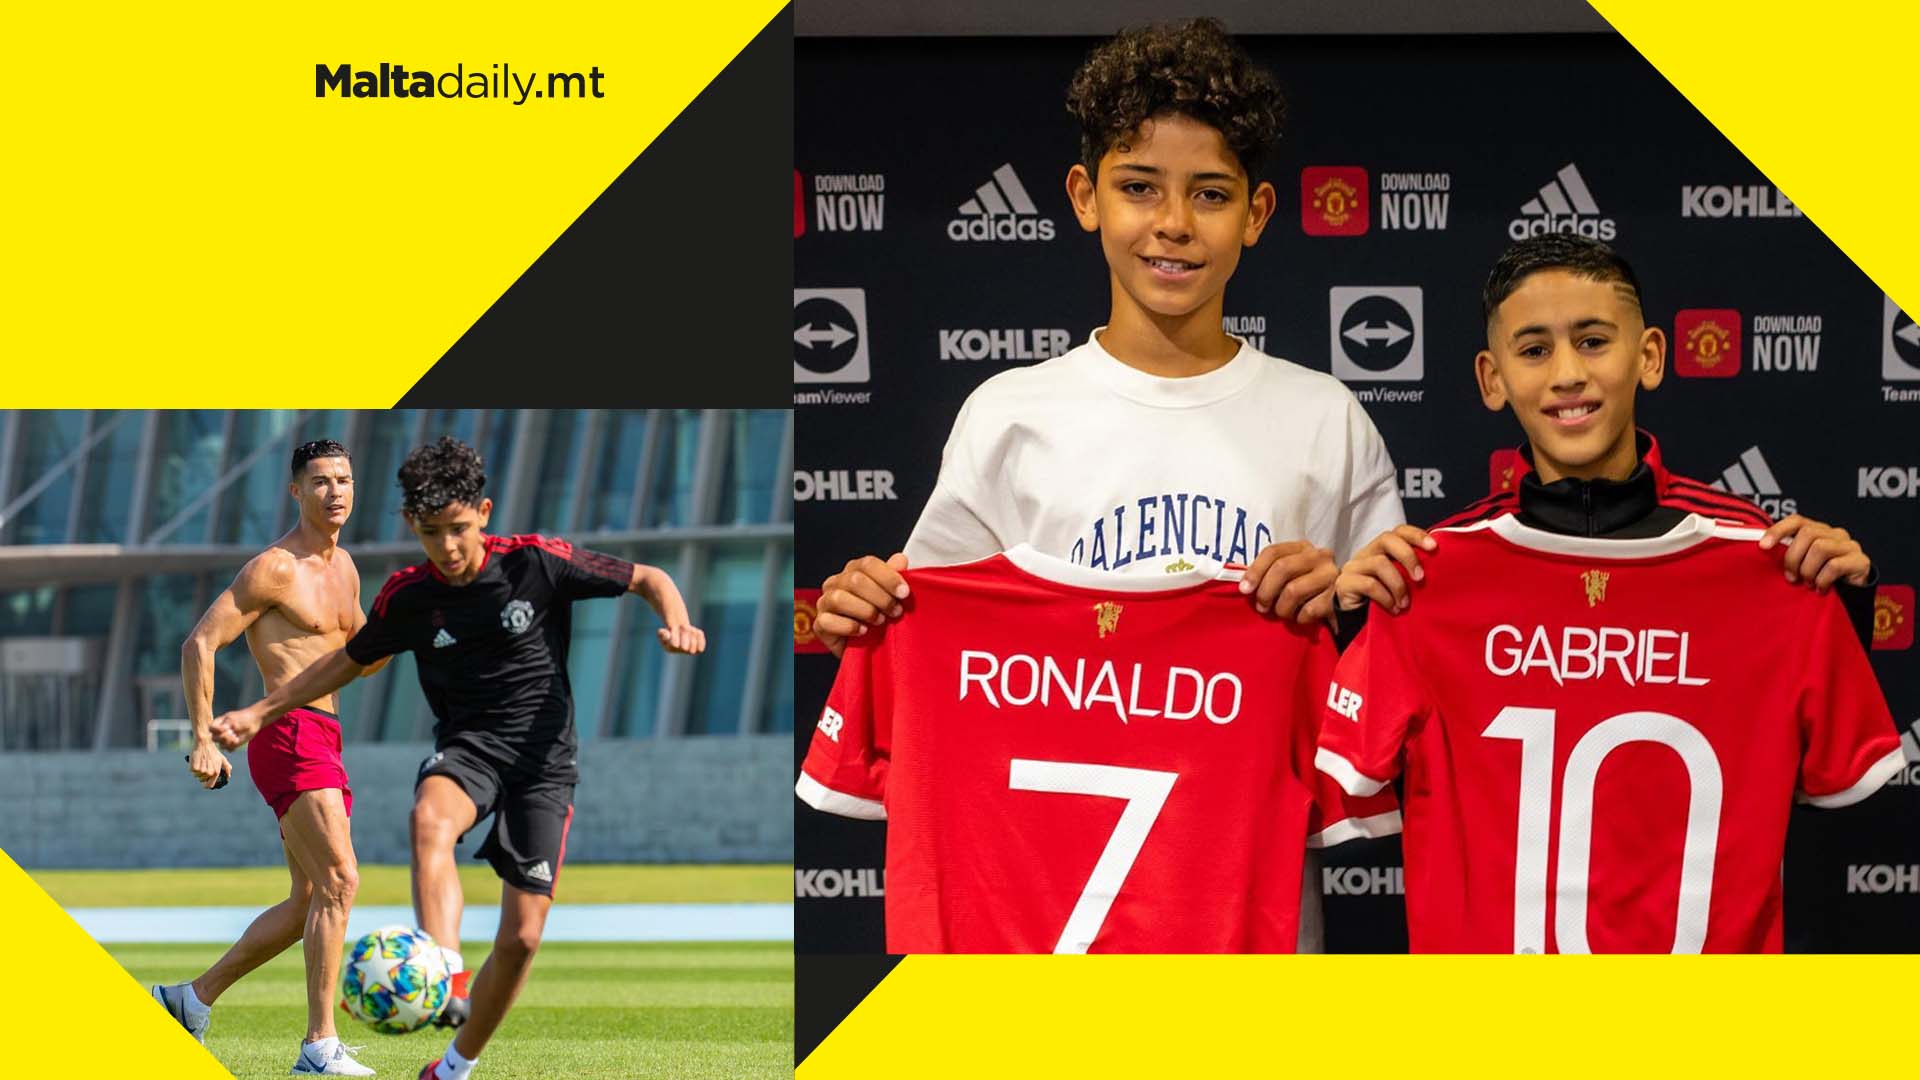 Cristiano Ronaldo Jr. officially signs with Manchester United